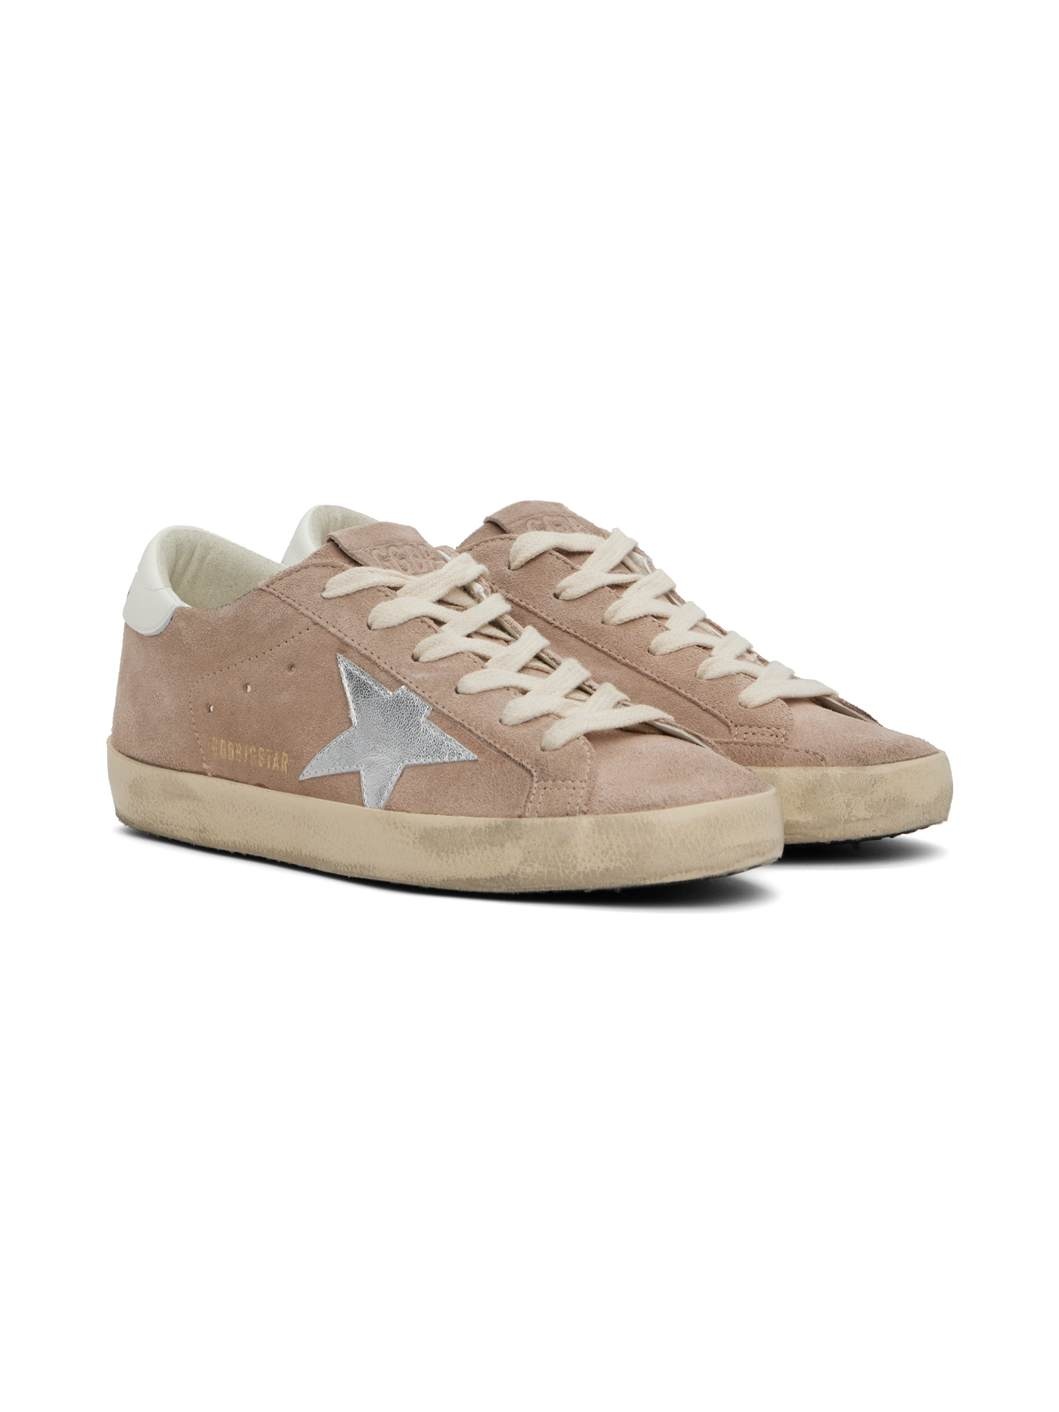 Pink & White Super-Star Classic Sneakers - 4